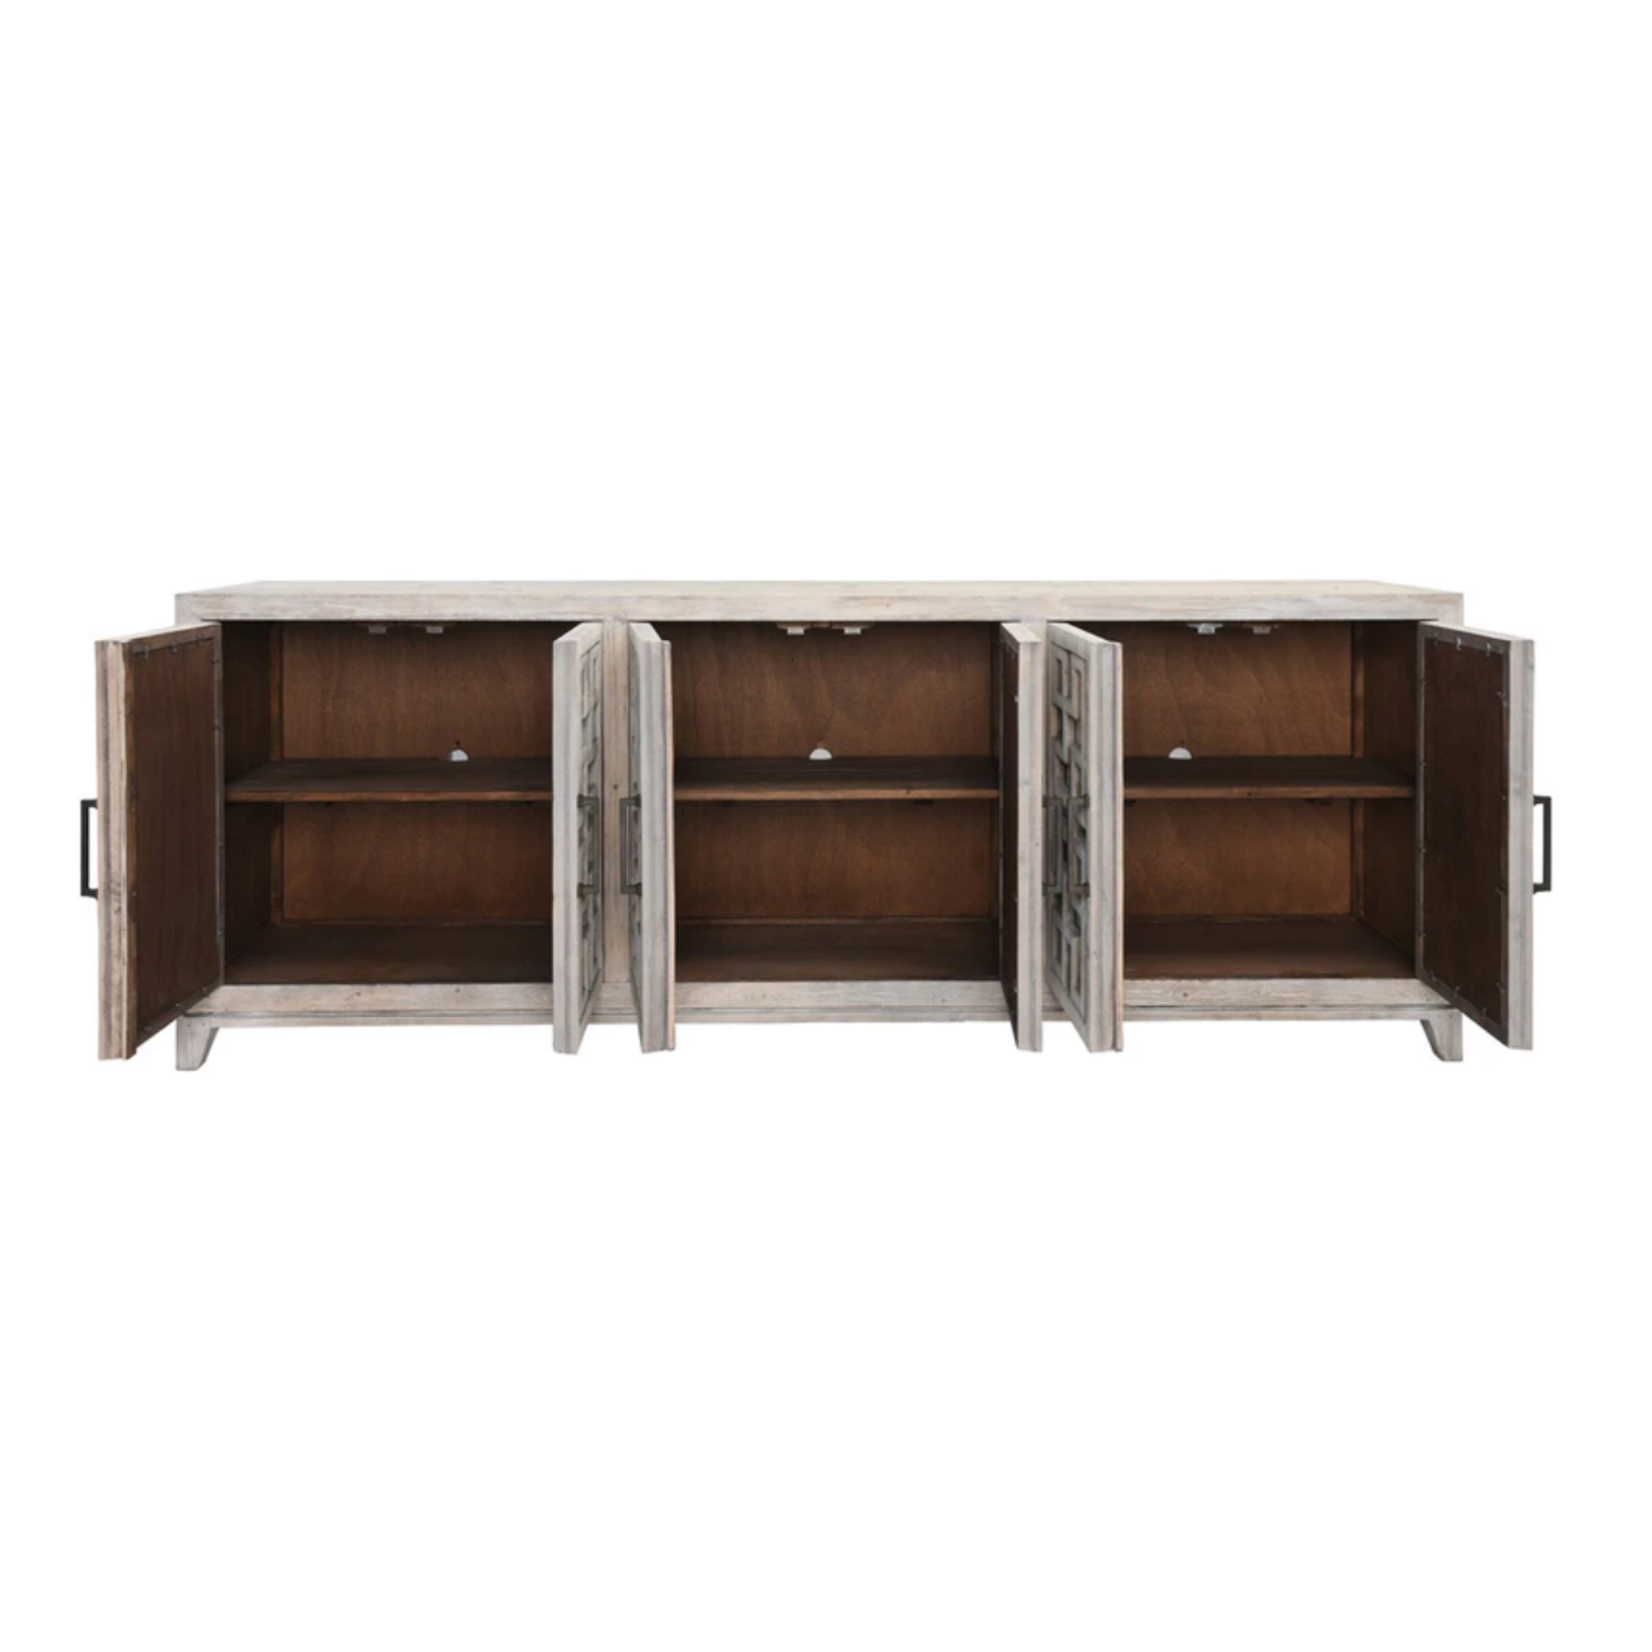 Outside The Box 98x18x36 Aniston Mirrored 6 Door Fret Work Sideboard